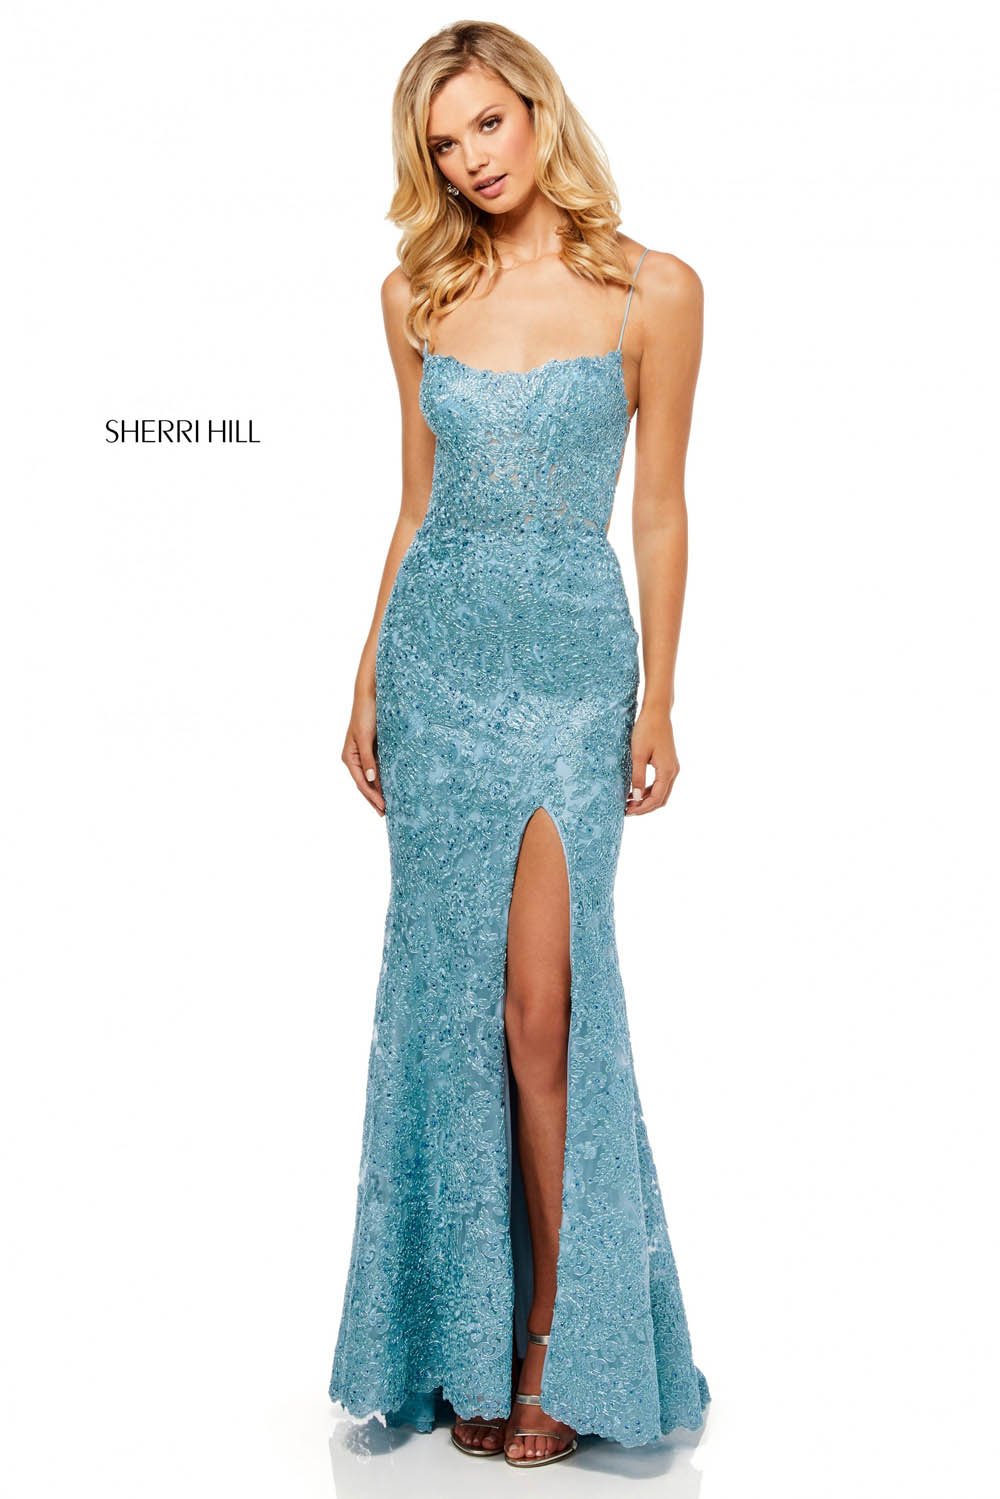 Sherri Hill 52647 dress images in these colors: Light Blue, Rose Gold, Ivory, Wine, Black.